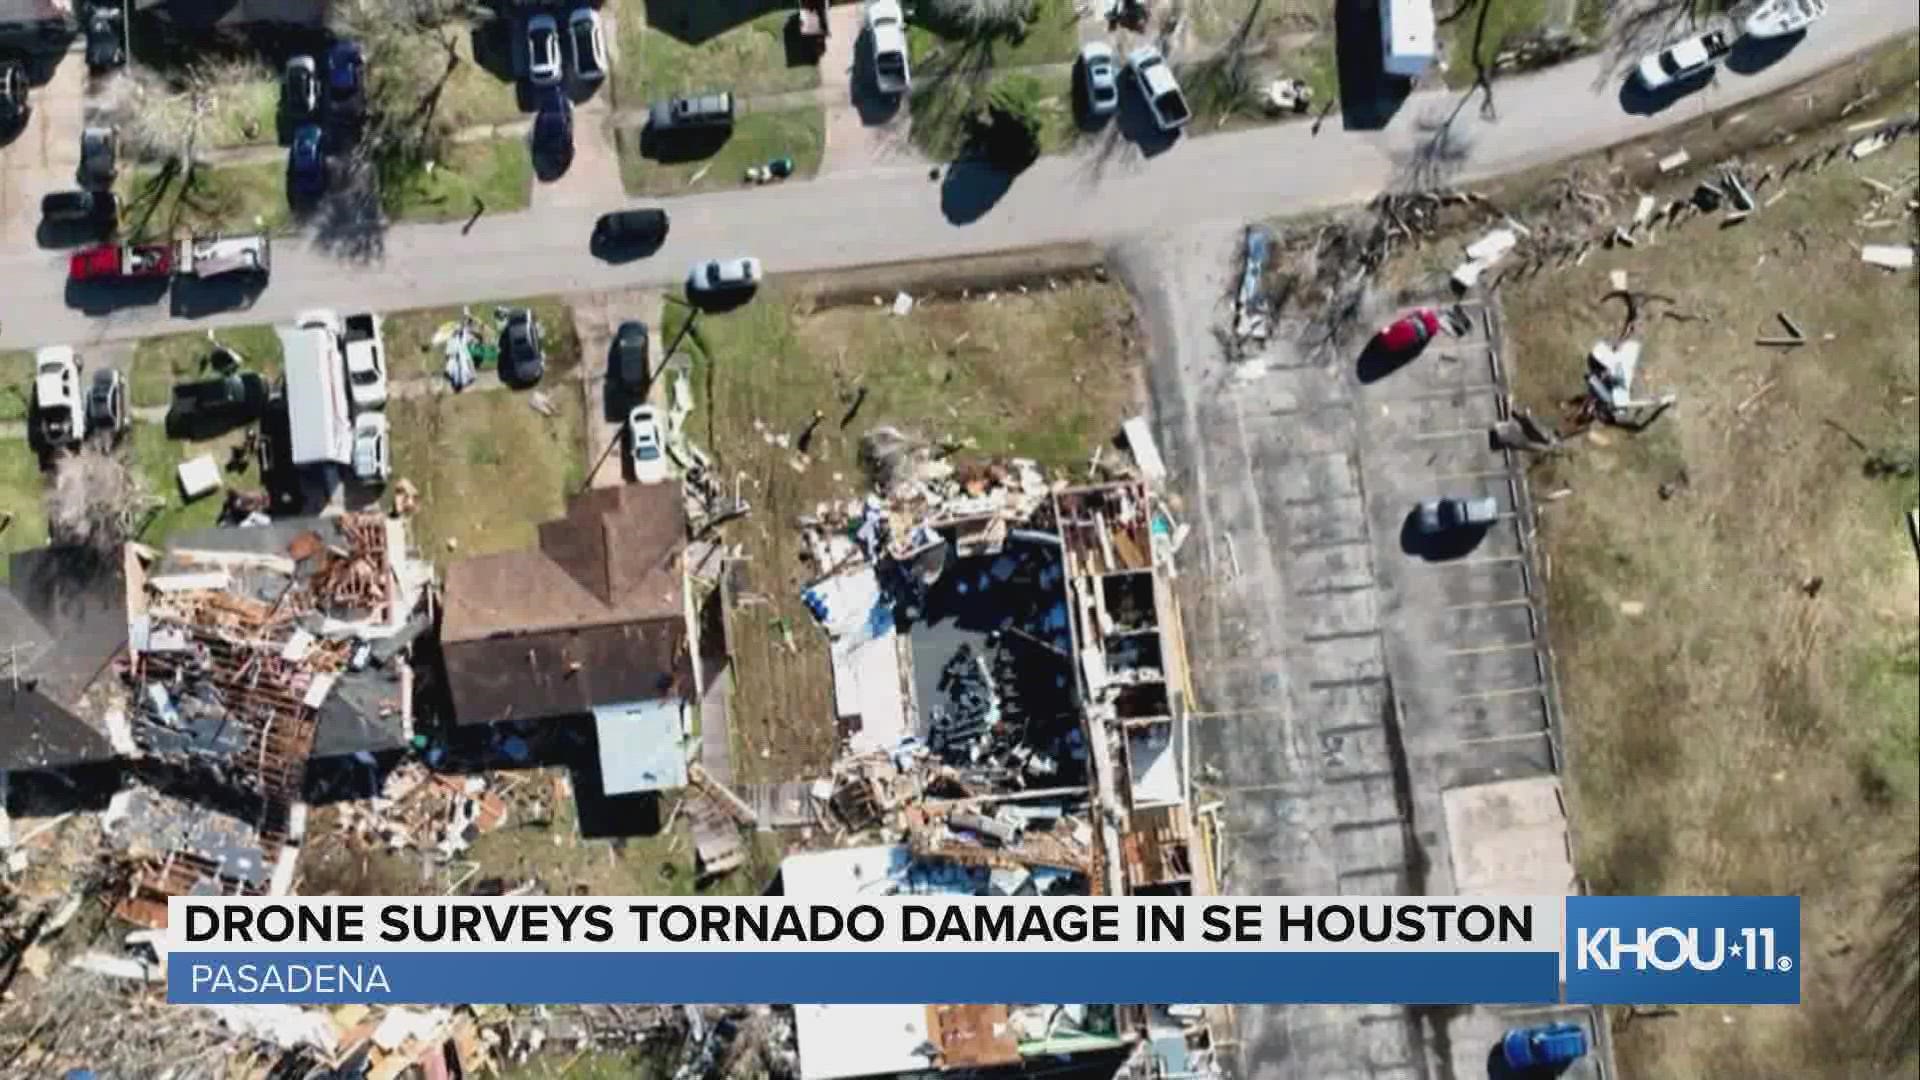 Drone 11 flies over Pasadena, Texas to check out the damage from strong storms a day earlier.